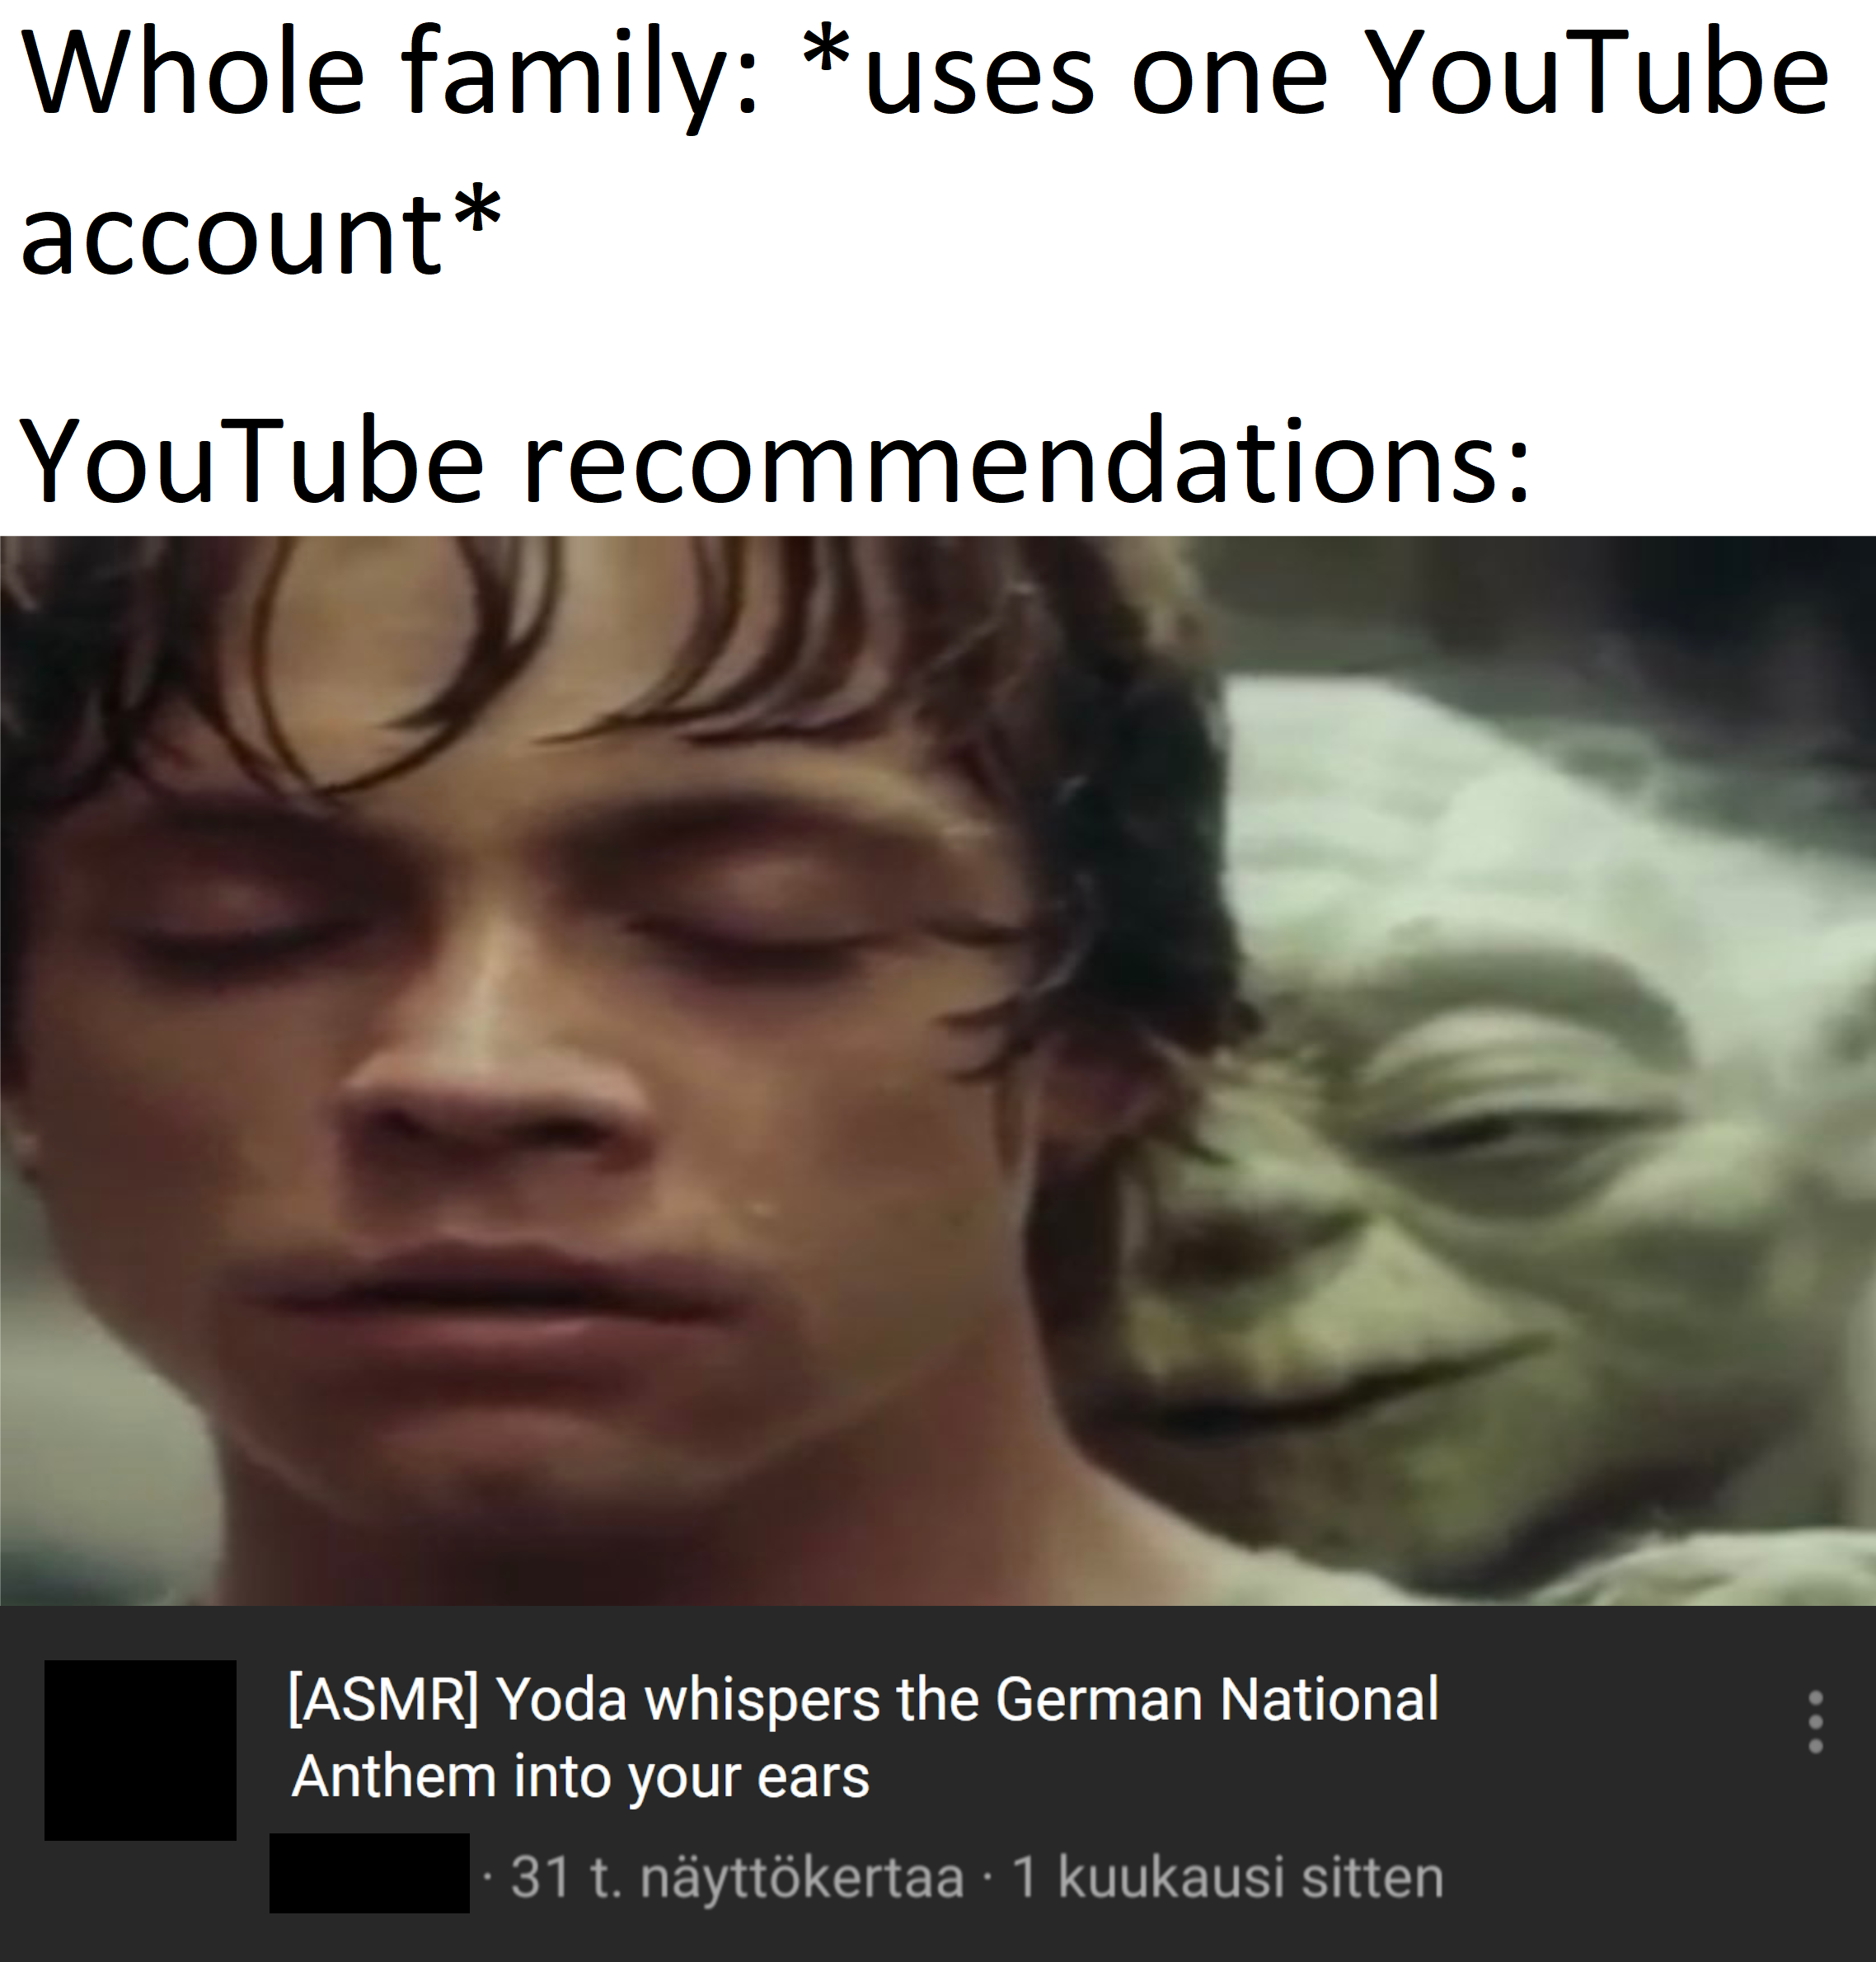 dank memes - facial expression - Whole family uses one YouTube account YouTube recommendations Asmr Yoda whispers the German National Anthem into your ears 31 t. nyttkertaa 1 kuukausi sitten